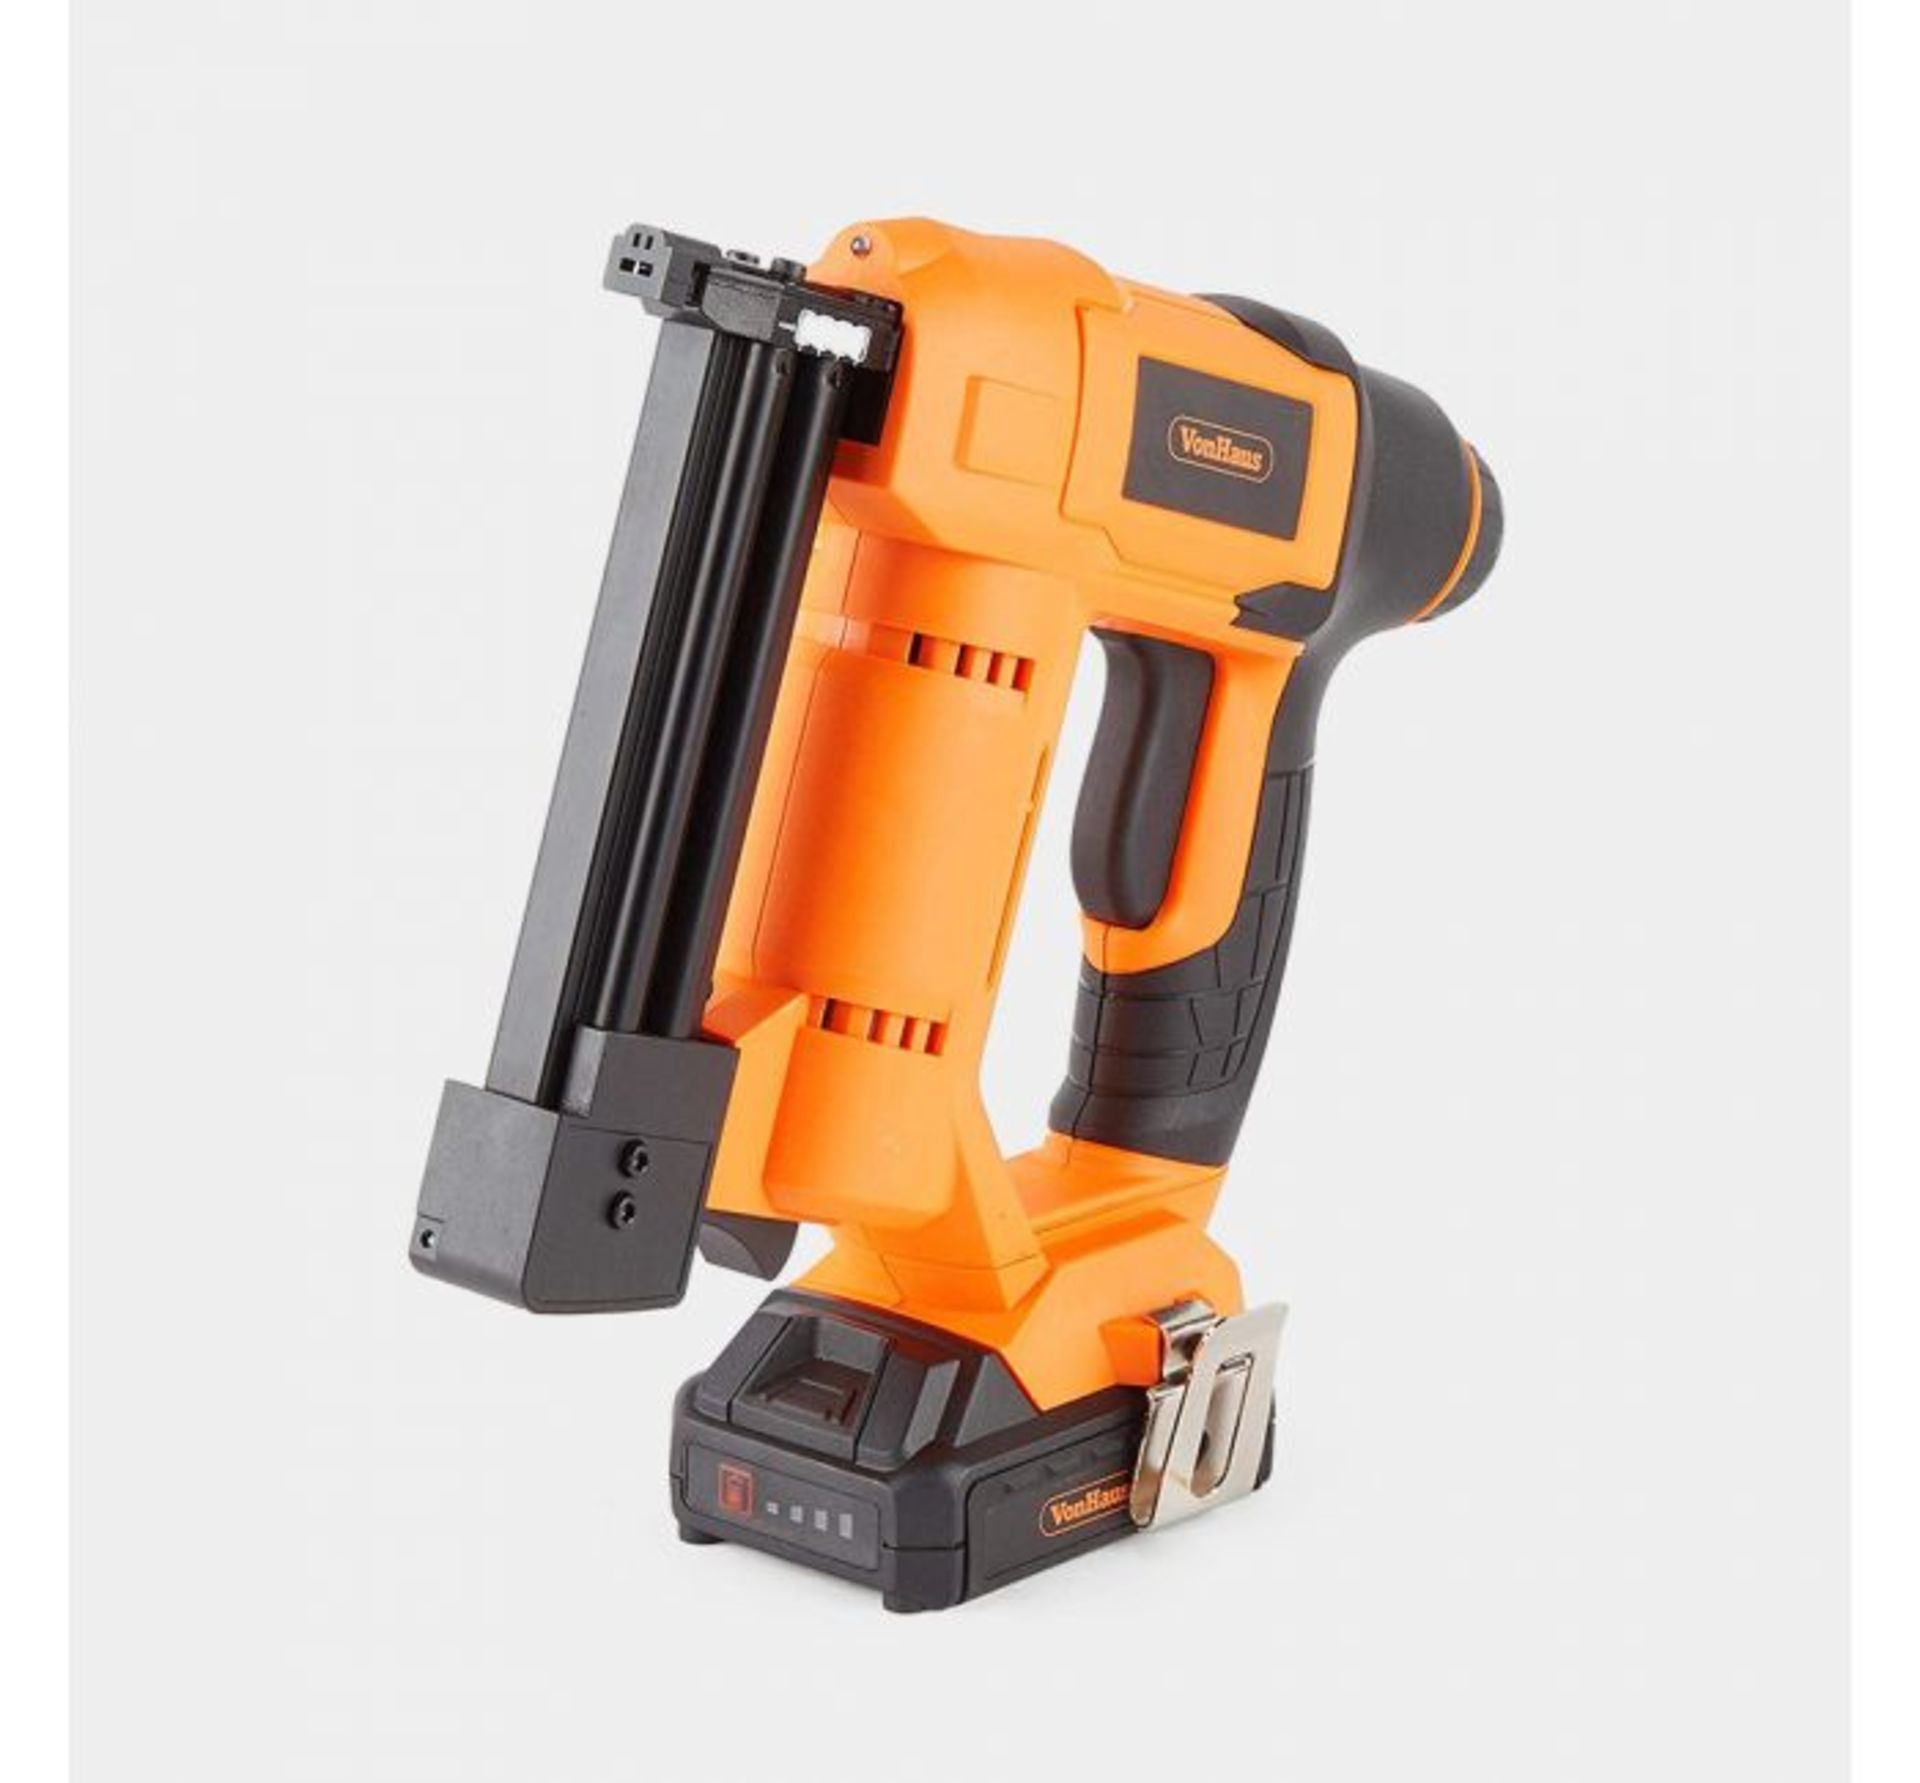 (GL95) 18V Li-ion Cordless Nailer Stapler Includes 500x staples 19mm, 500x brad nails 25mm and... - Image 2 of 3